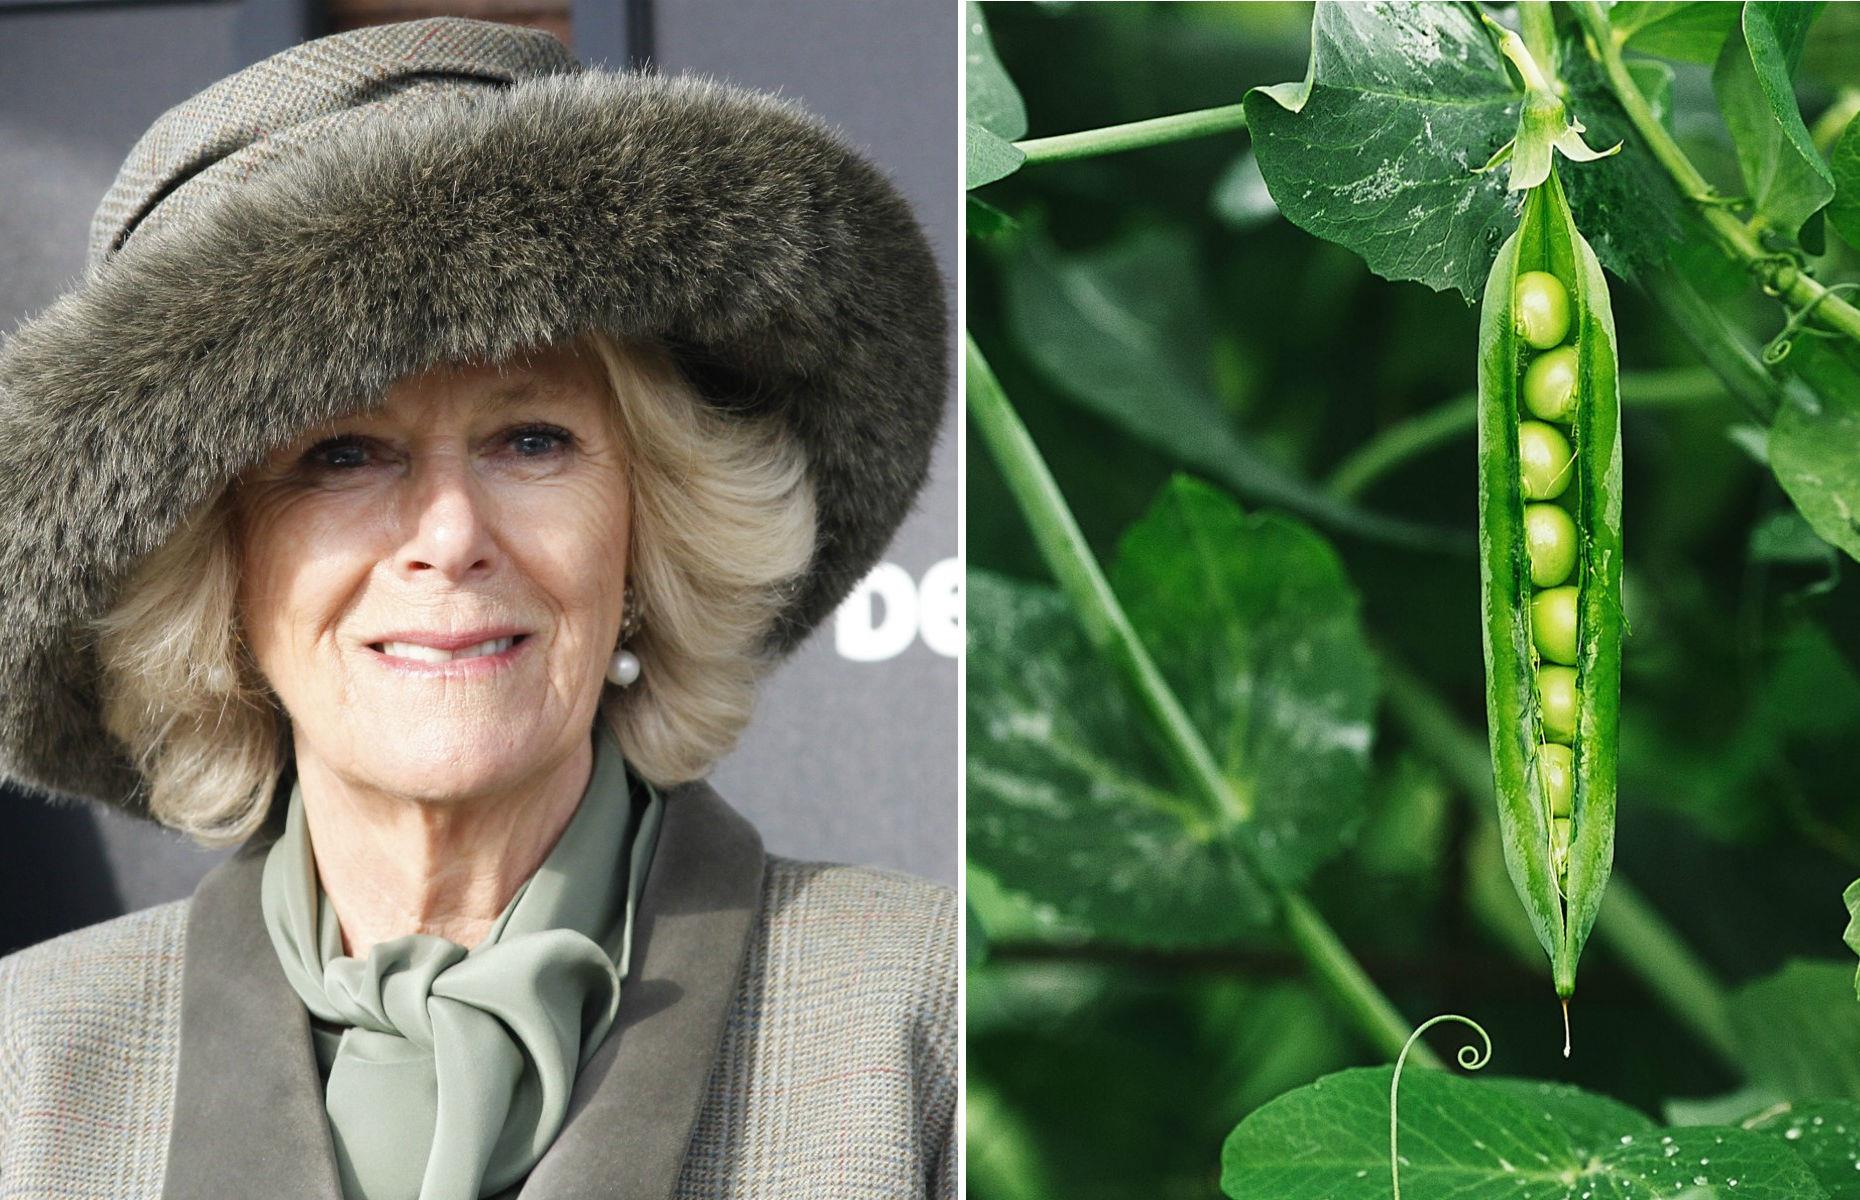 <p>Camilla has revealed an unusual penchant for raw peas. “I tell you what I really like – eating peas straight from the garden,” she told students during a visit to a school in Slough, Berkshire. “If you take them straight from the pod they are delicious and really sweet. I take all my grandchildren down to the garden and they spend hours and hours eating peas."</p>